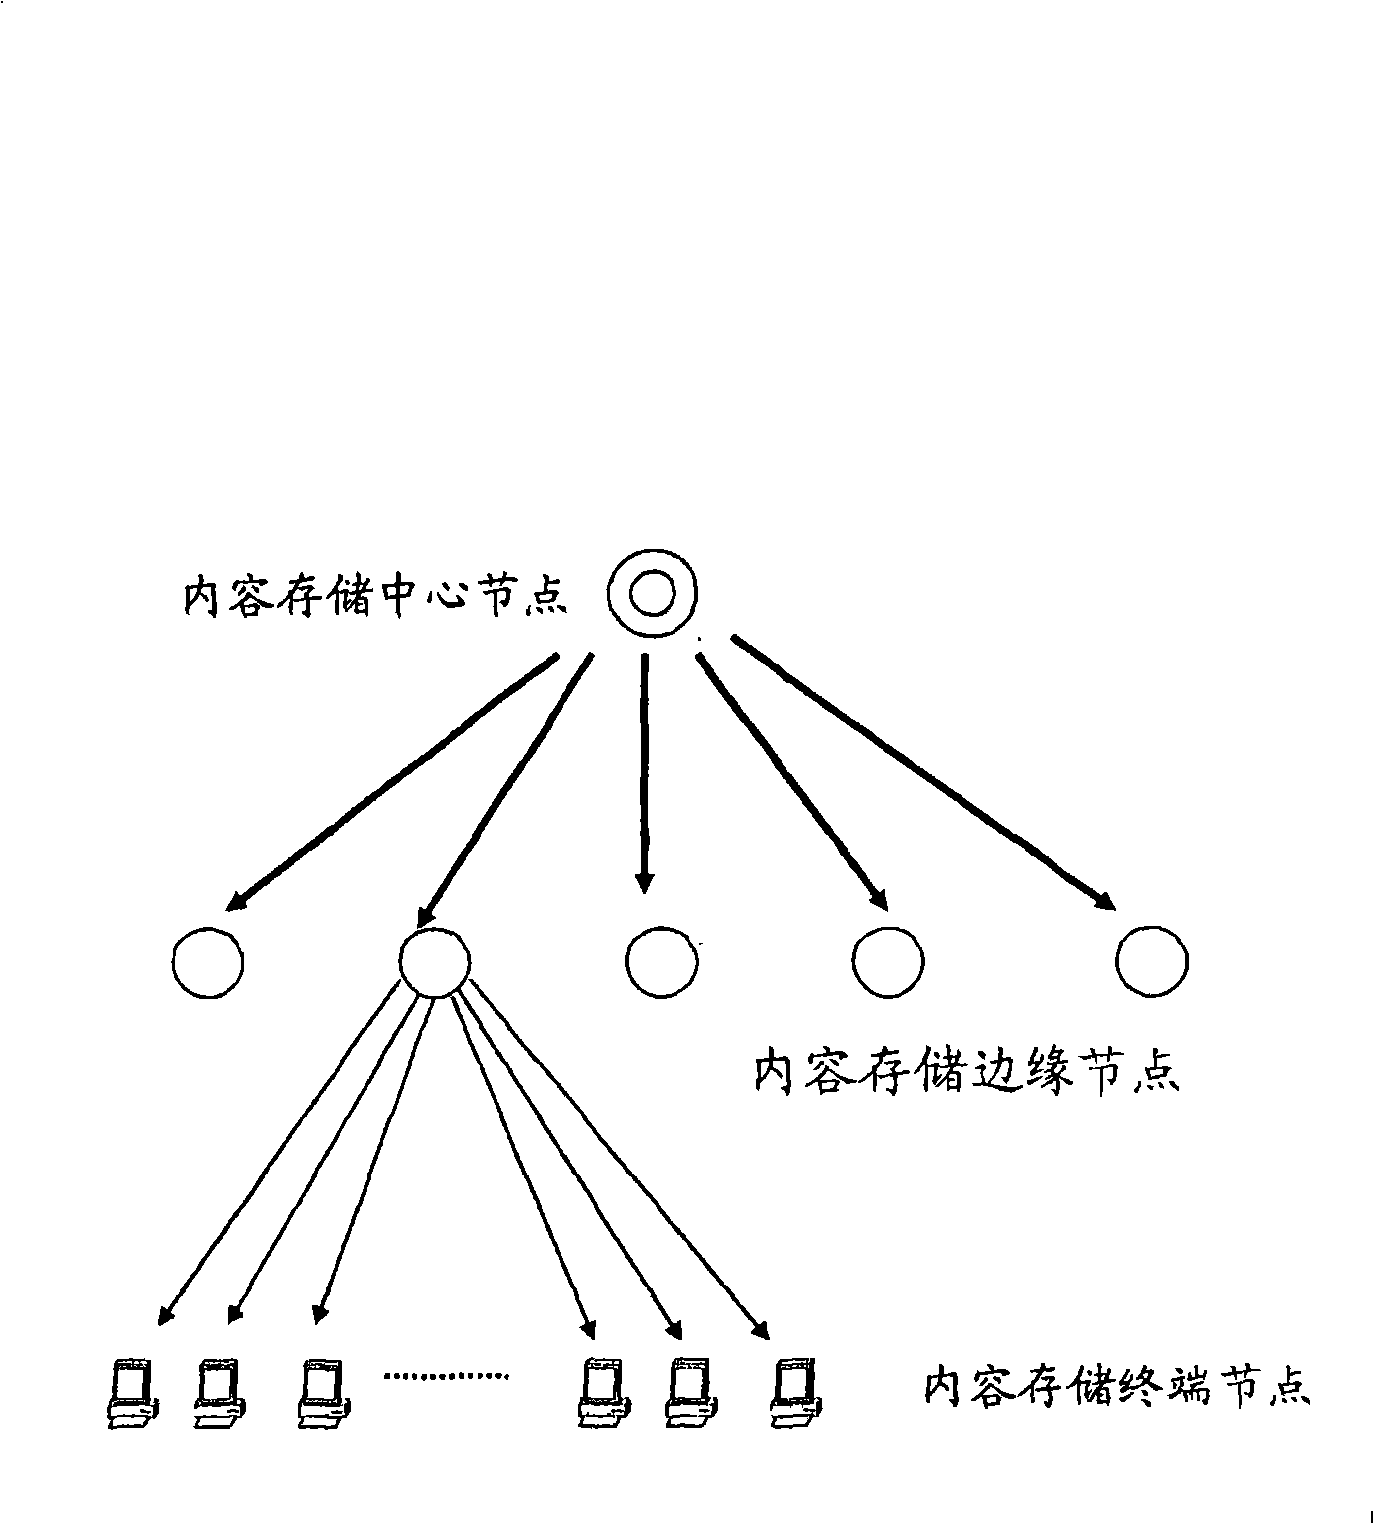 Contents grading memory of telecommunication level P2P network and transmission method